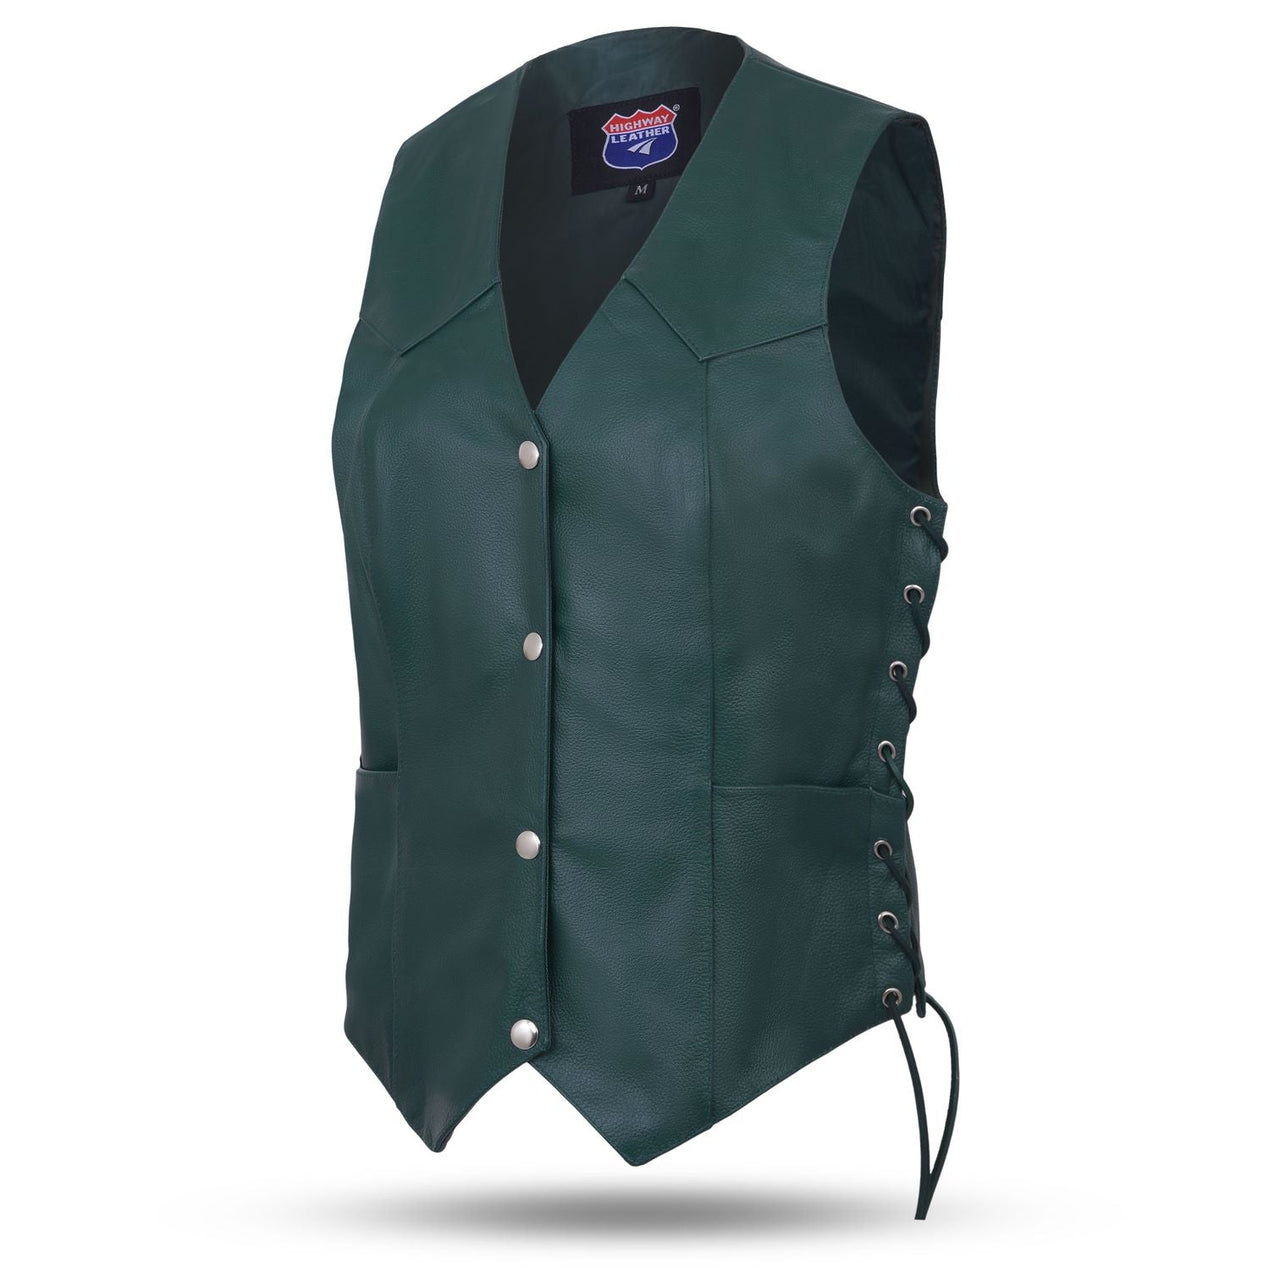 Hunter Green Women motorcycle Leather Vest Biker Club Conceale Carry #14501Green - HighwayLeather